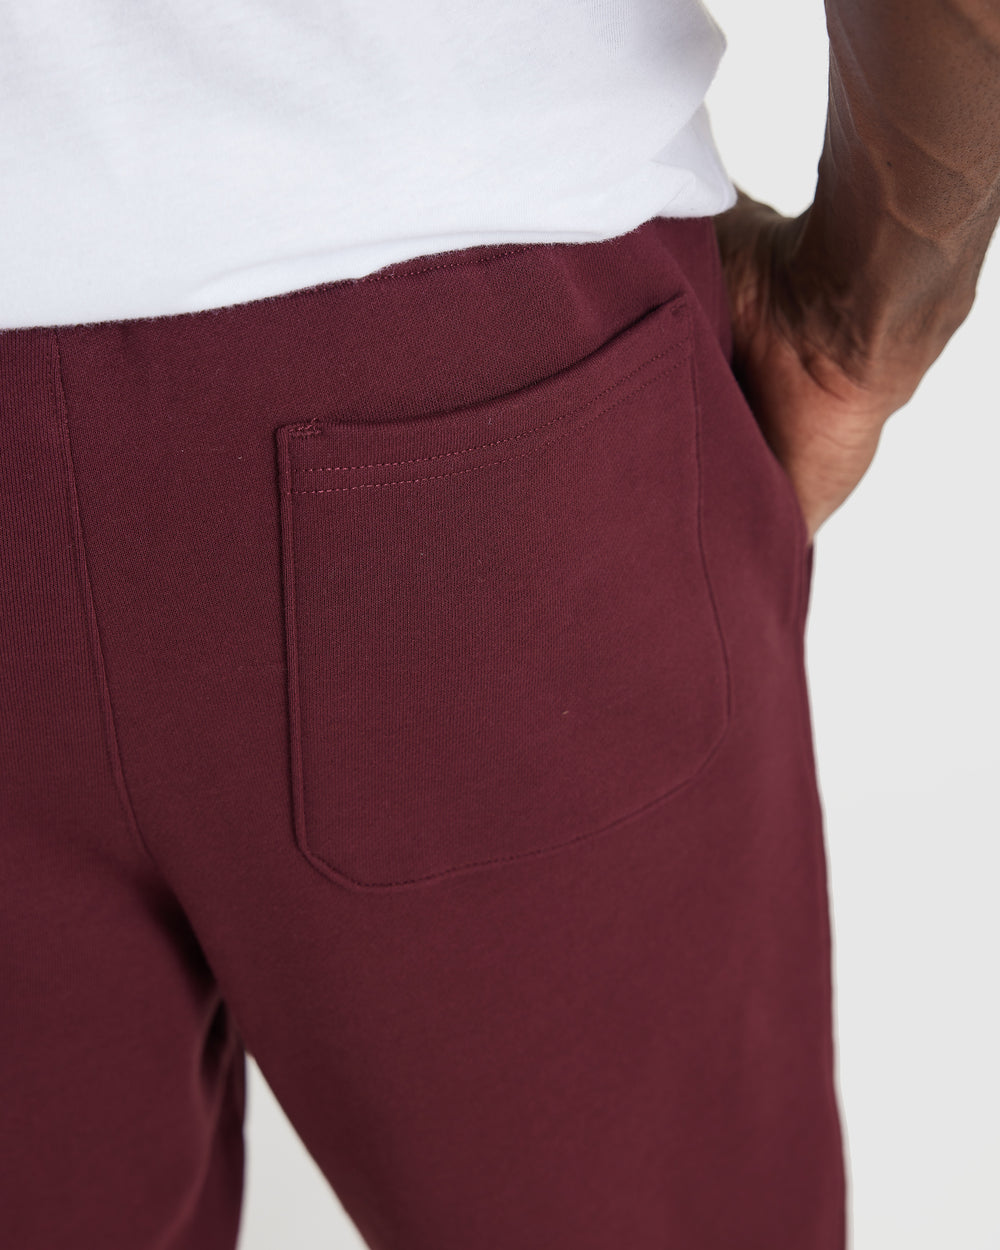 Carbon Fleece French Terry Jogger – True Classic